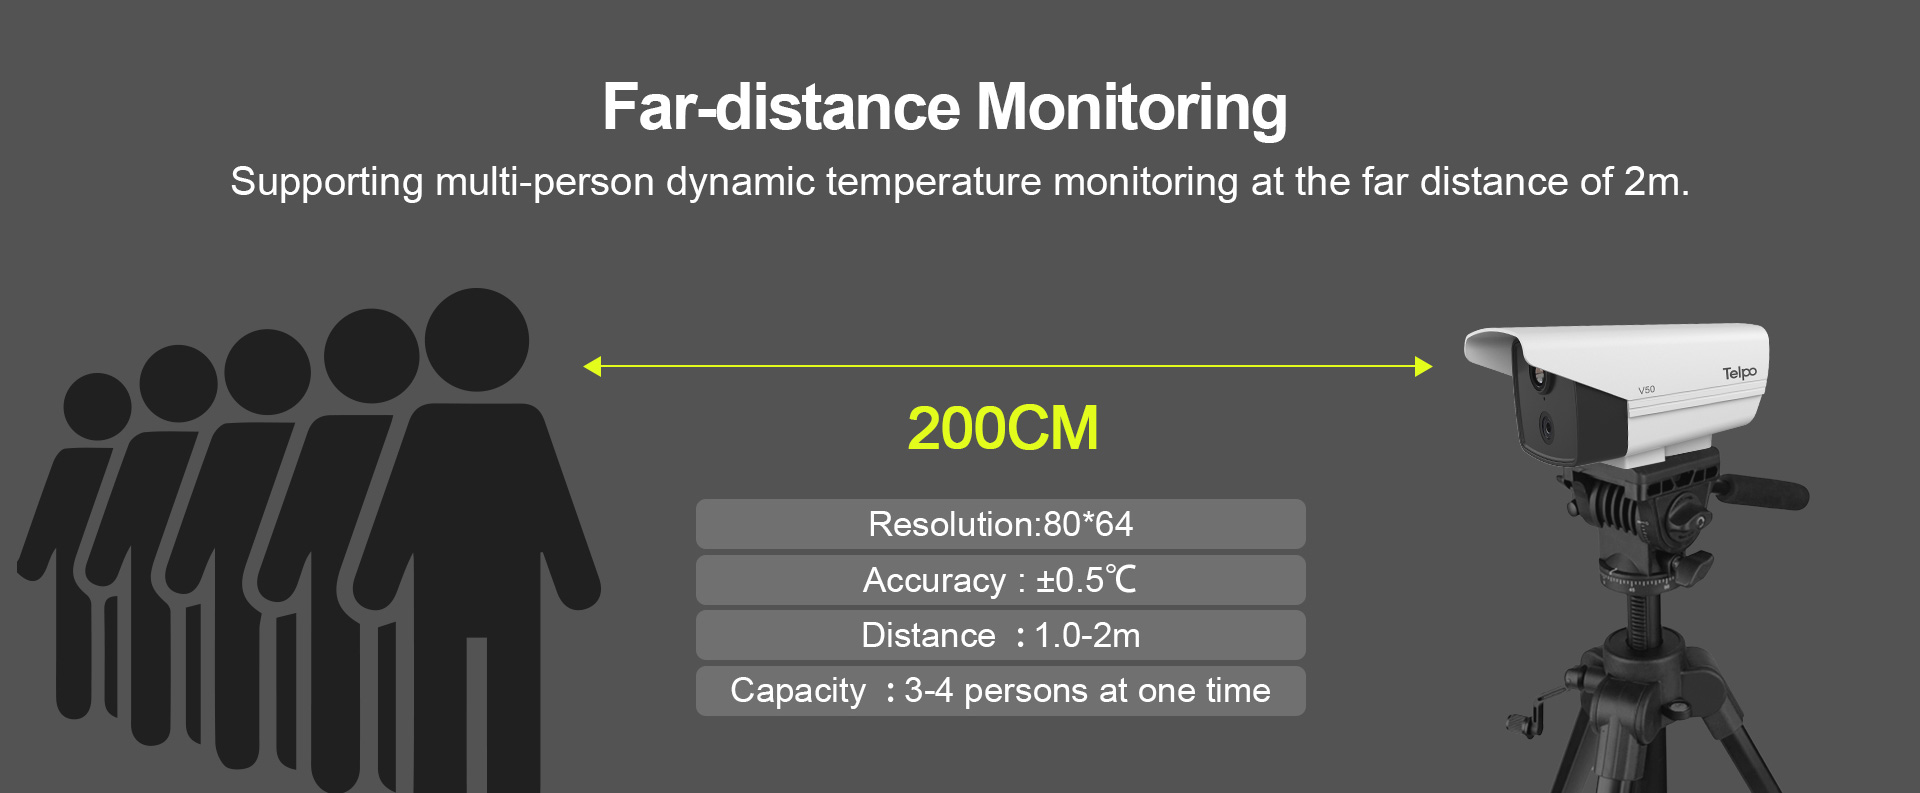 v50 Temperature Screening Thermography Camera multi-person dynamic temperature monitoring at the far distance of 2m. 